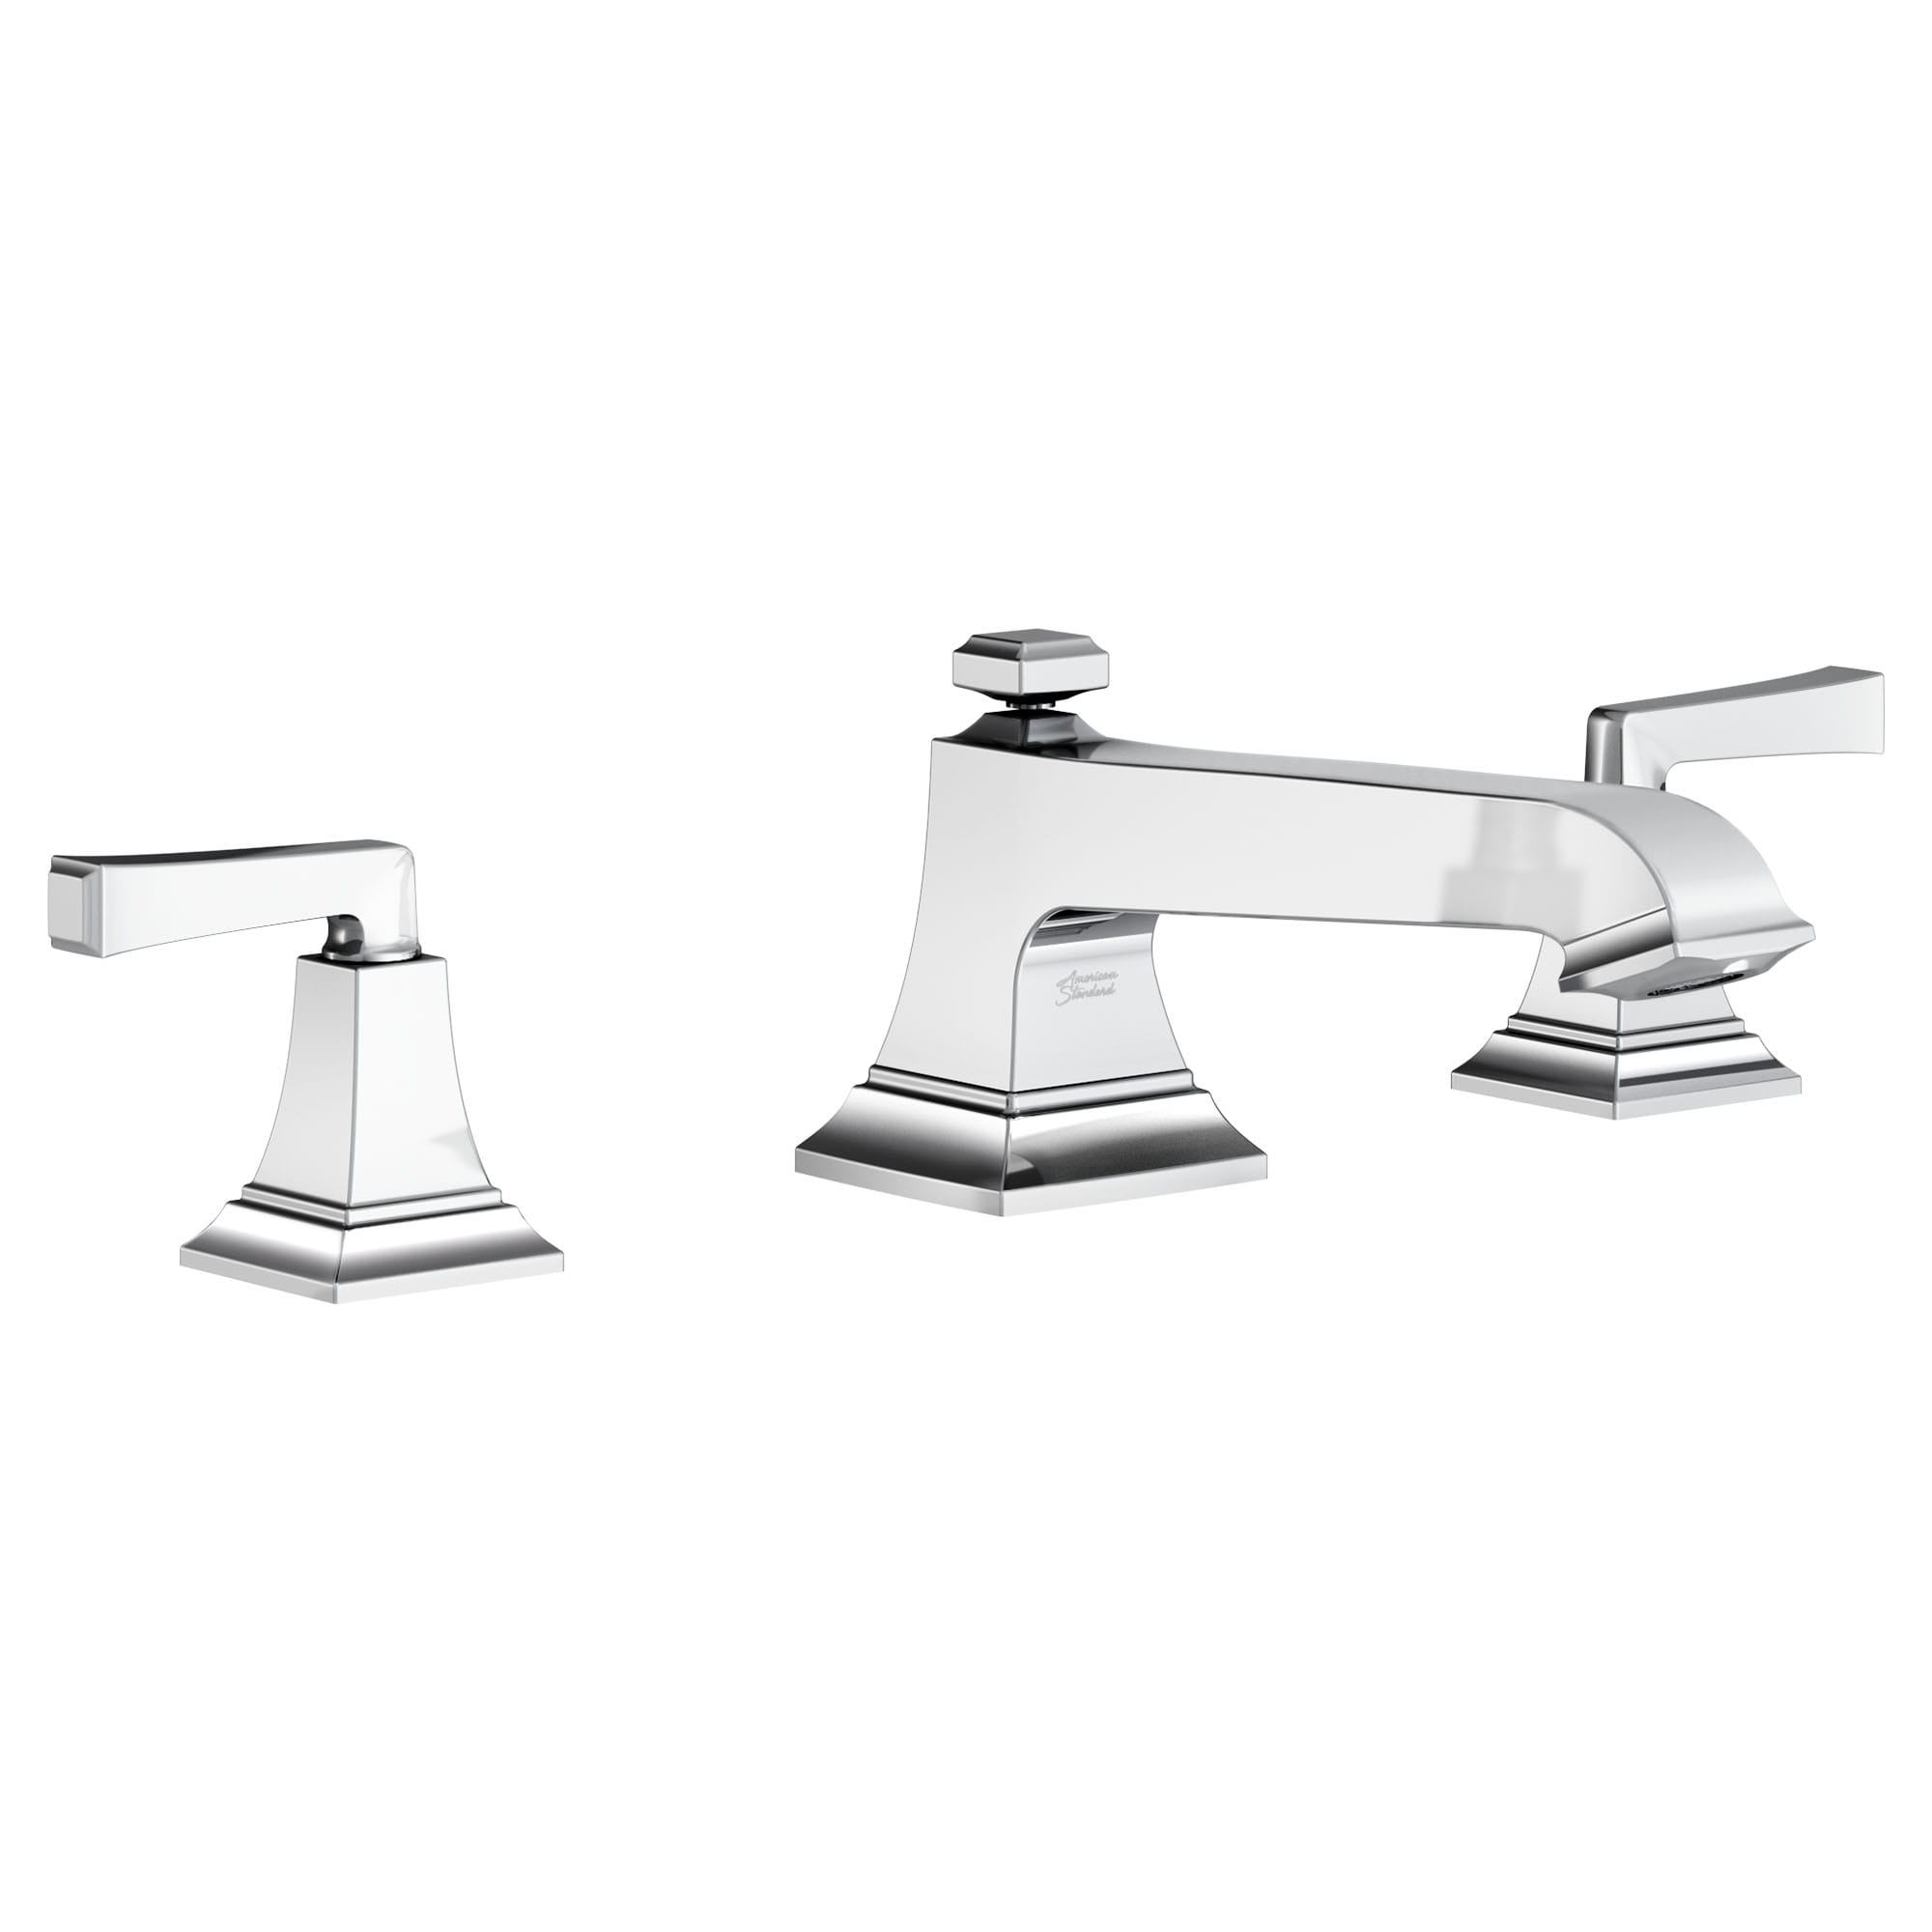 Town Square S Bathub Faucet With Lever Handles for Flash Rough In Valve CHROME